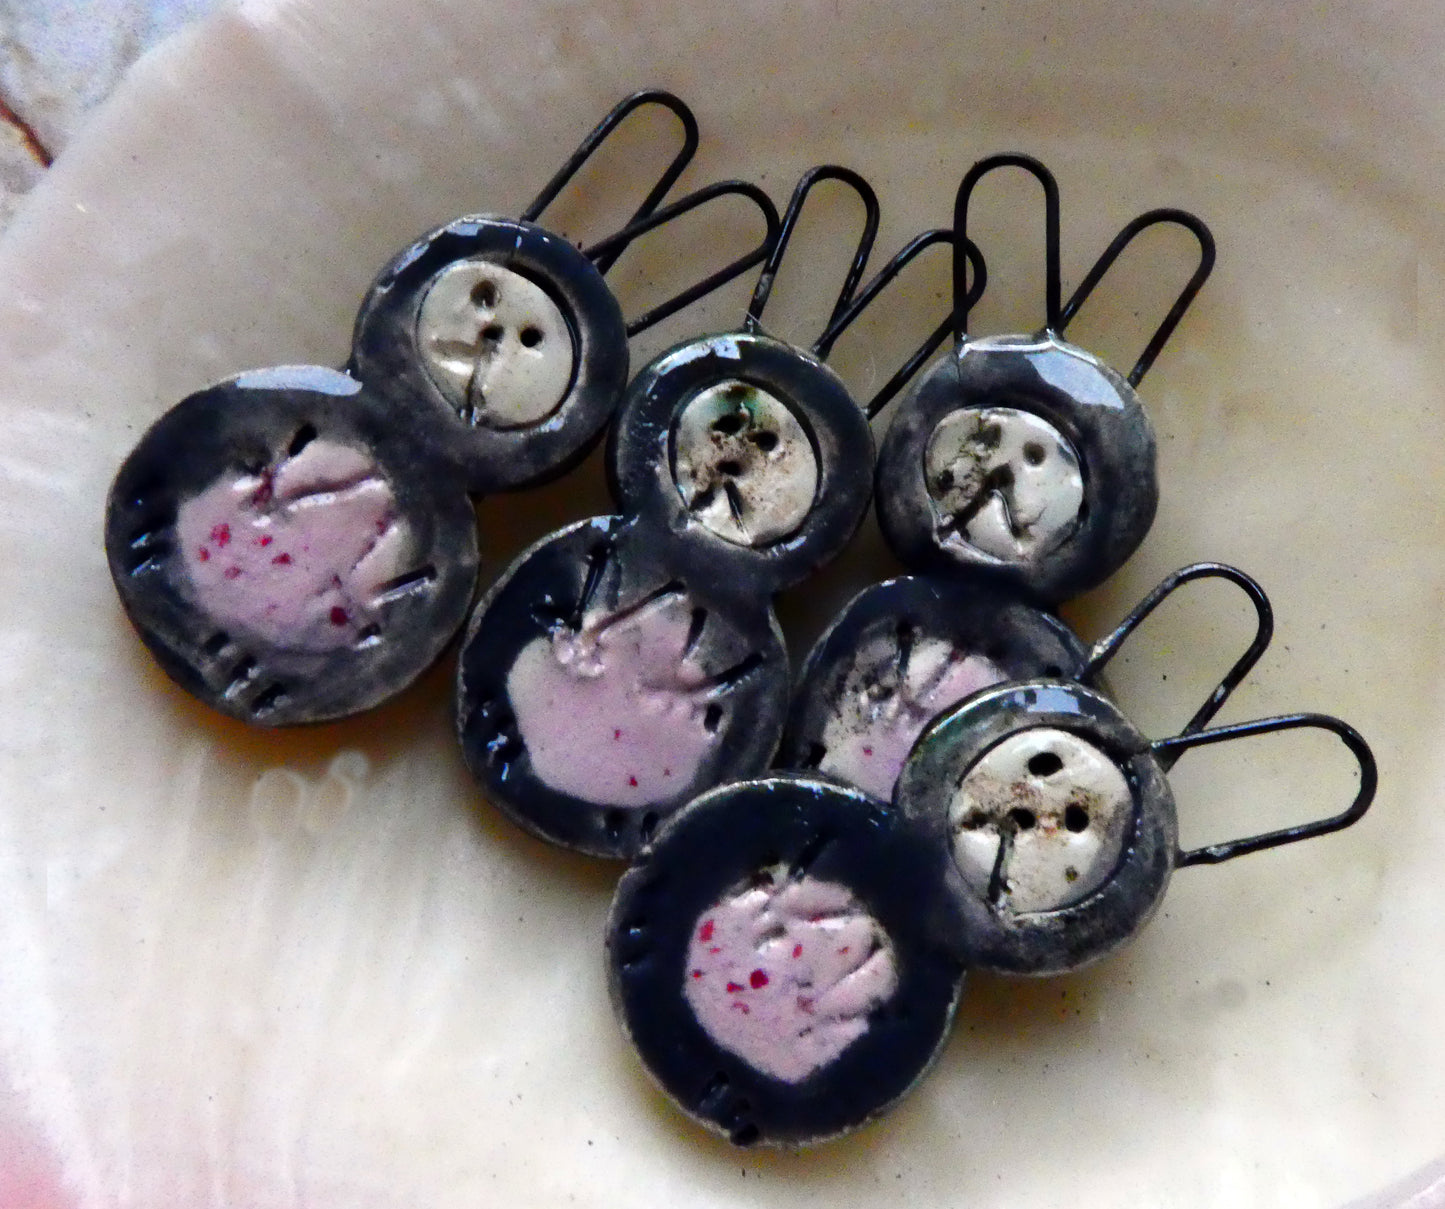 Ceramic Simple Souls Earring Charms - Easter Bunnies - Licorice